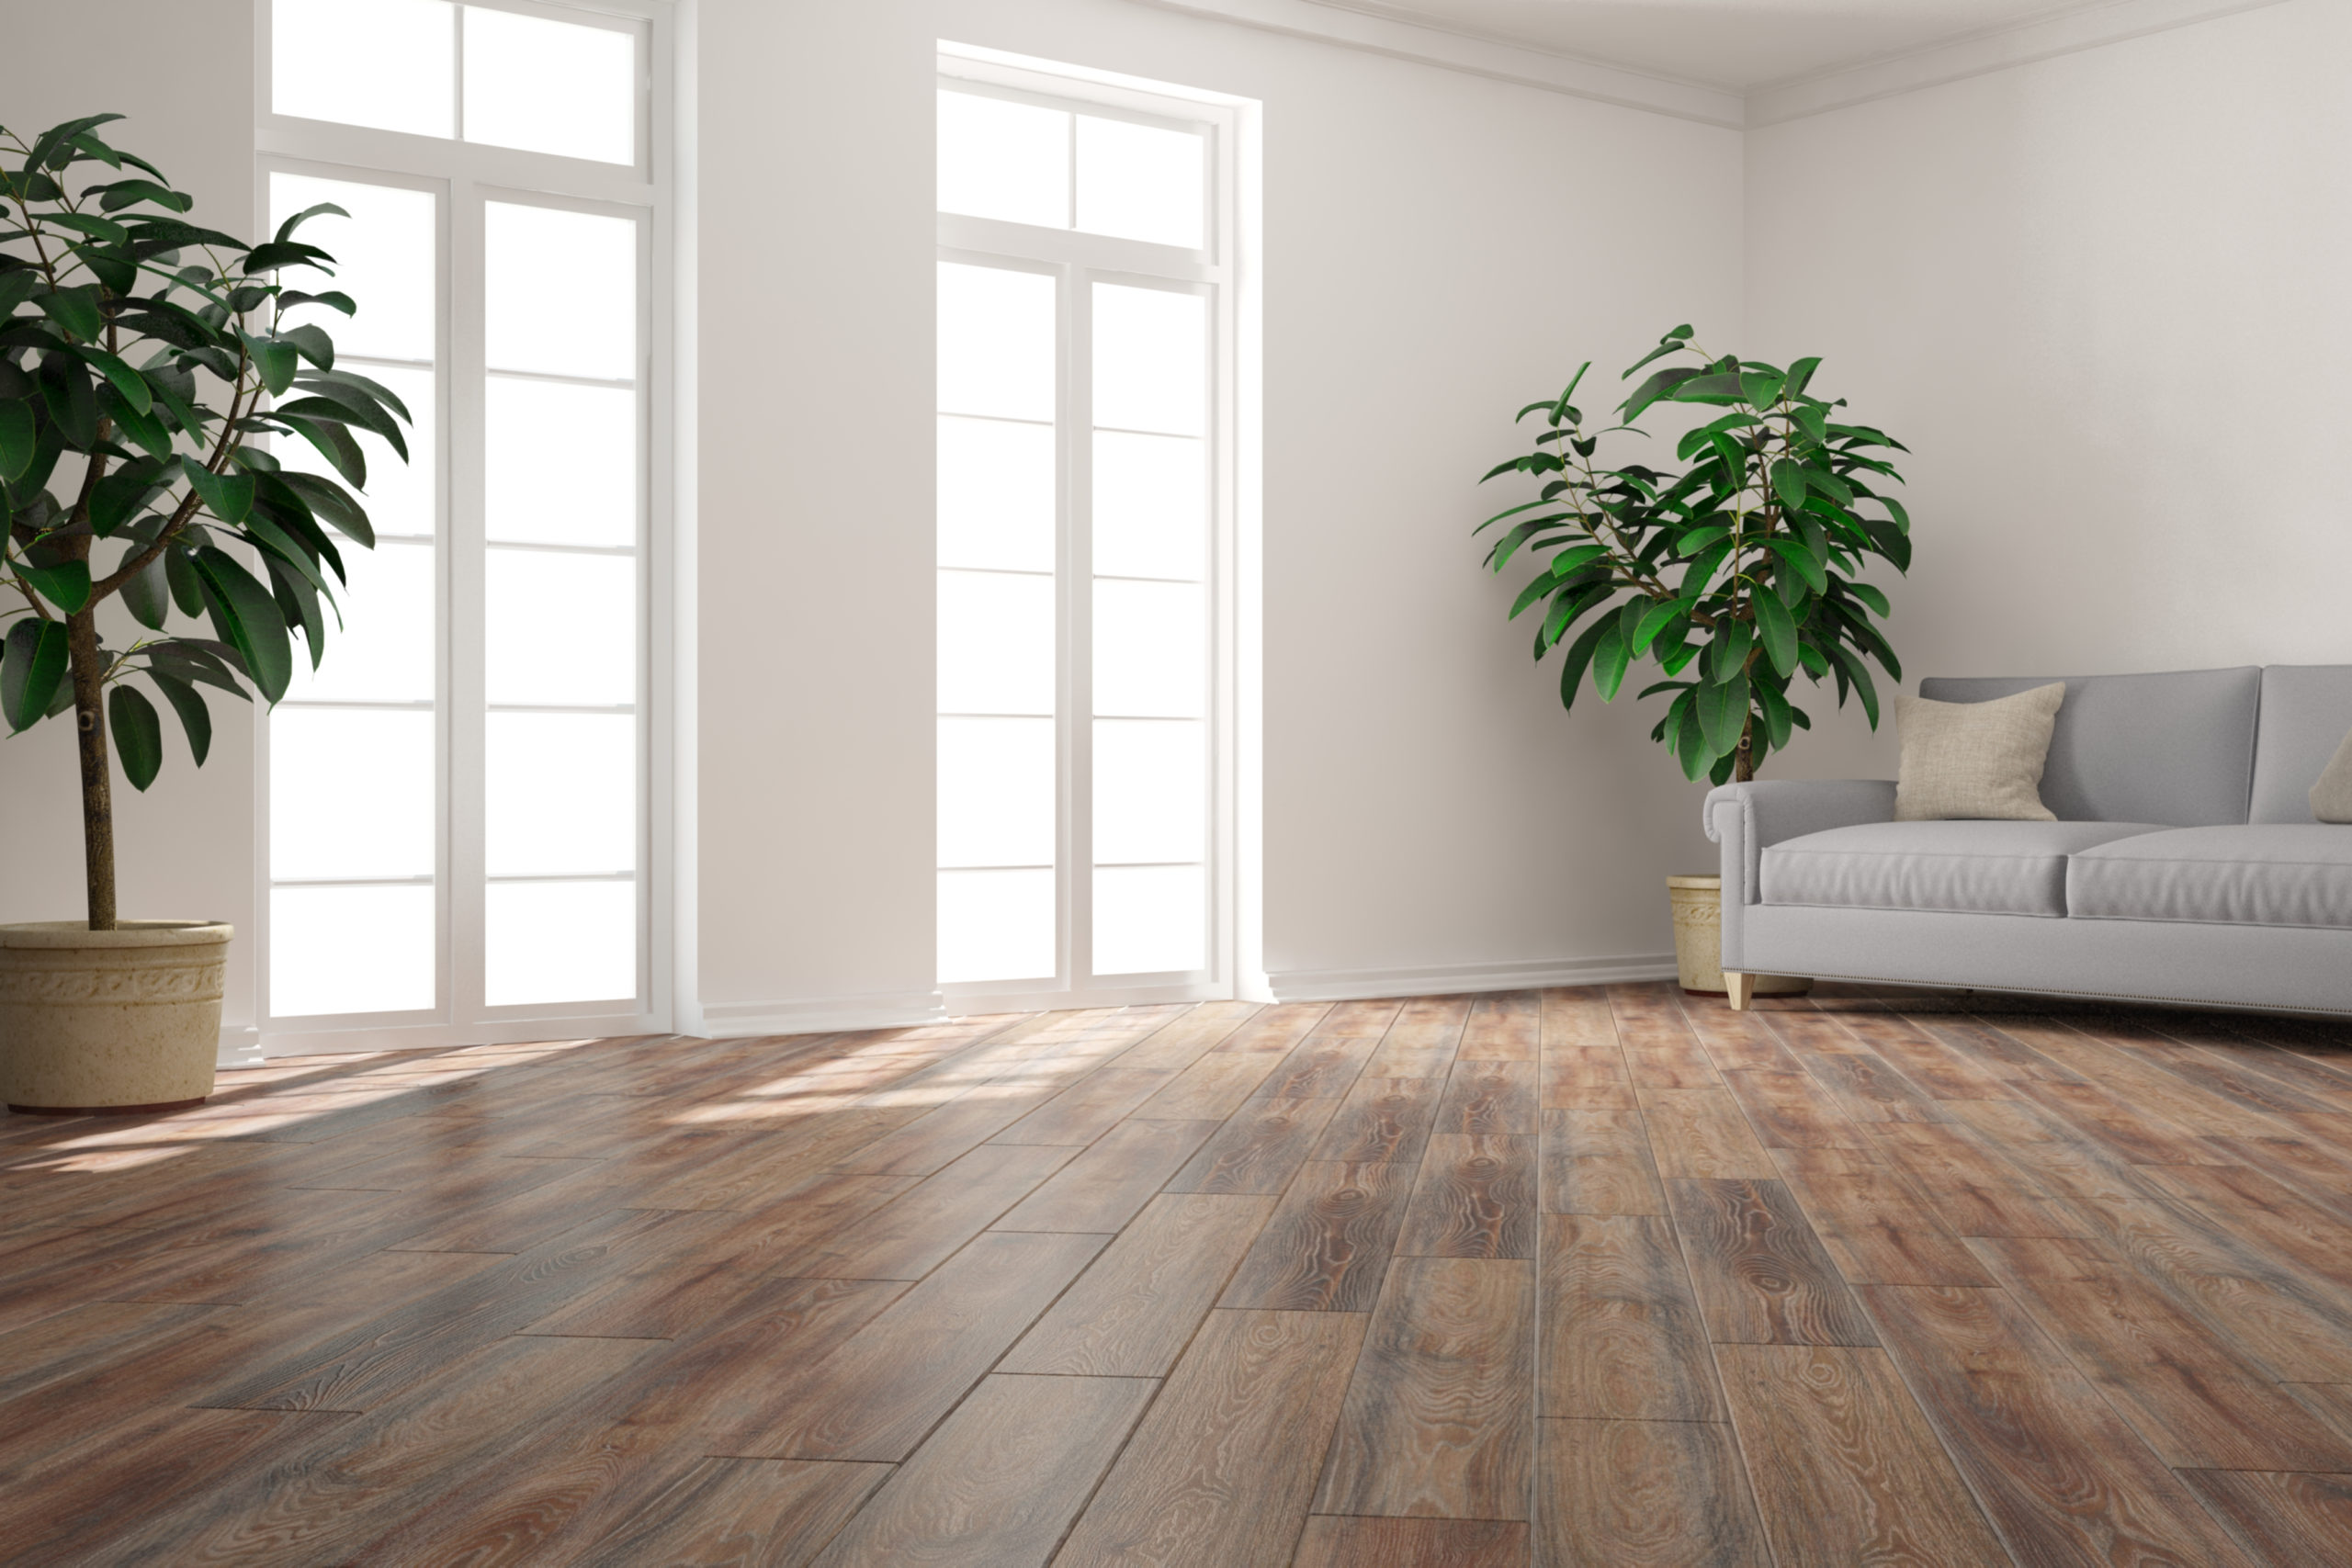 Armstrong Laminate Flooring Review, Cost Of Armstrong Laminate Flooring Per Square Foot